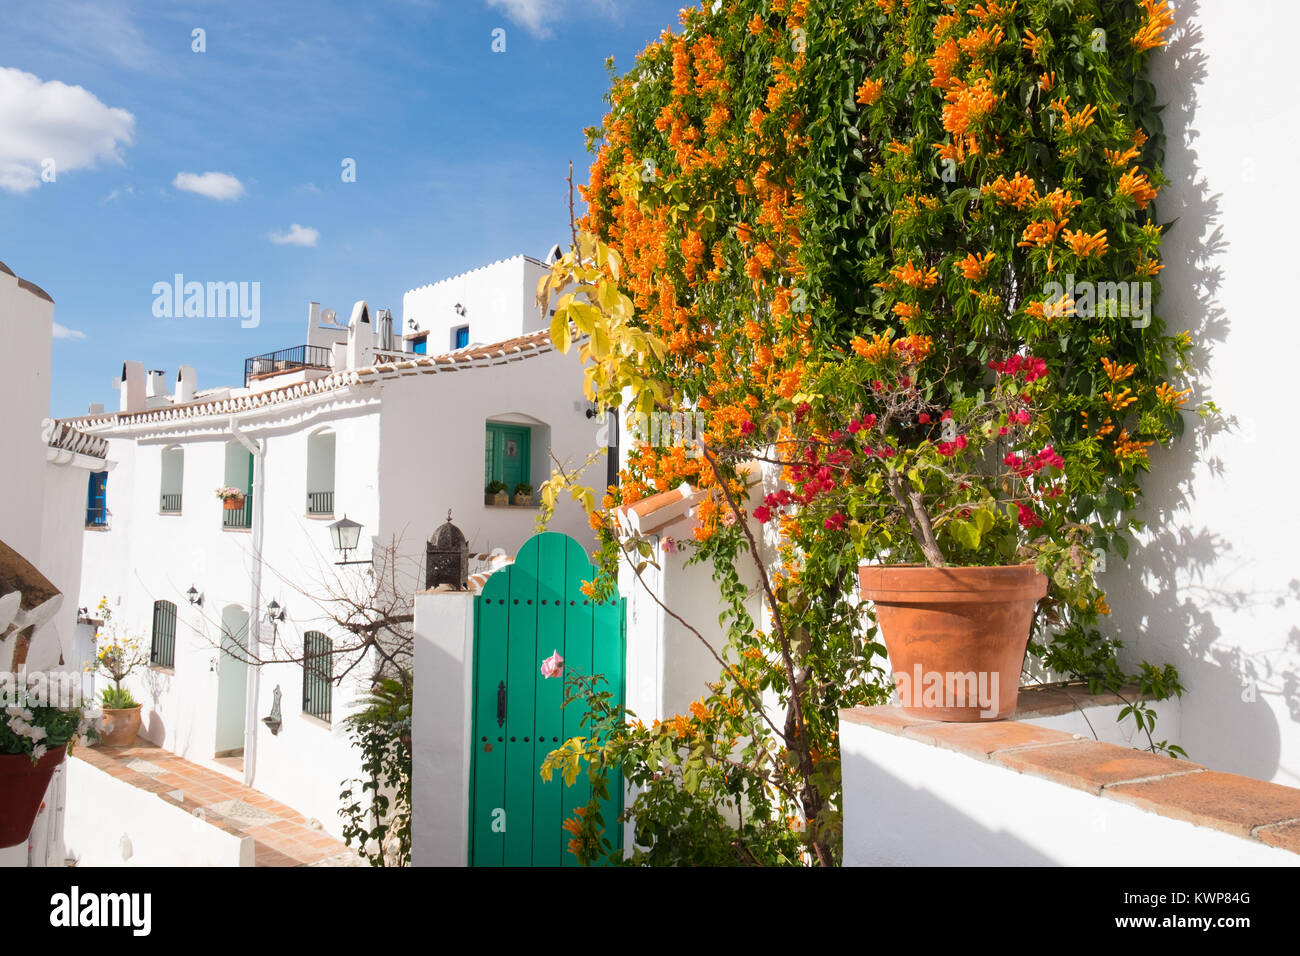 El Acebuchal, a white village or peublo blanco, in the region of Andalusia east of Malaga. Once deserted, the village has recently been restored. Stock Photo